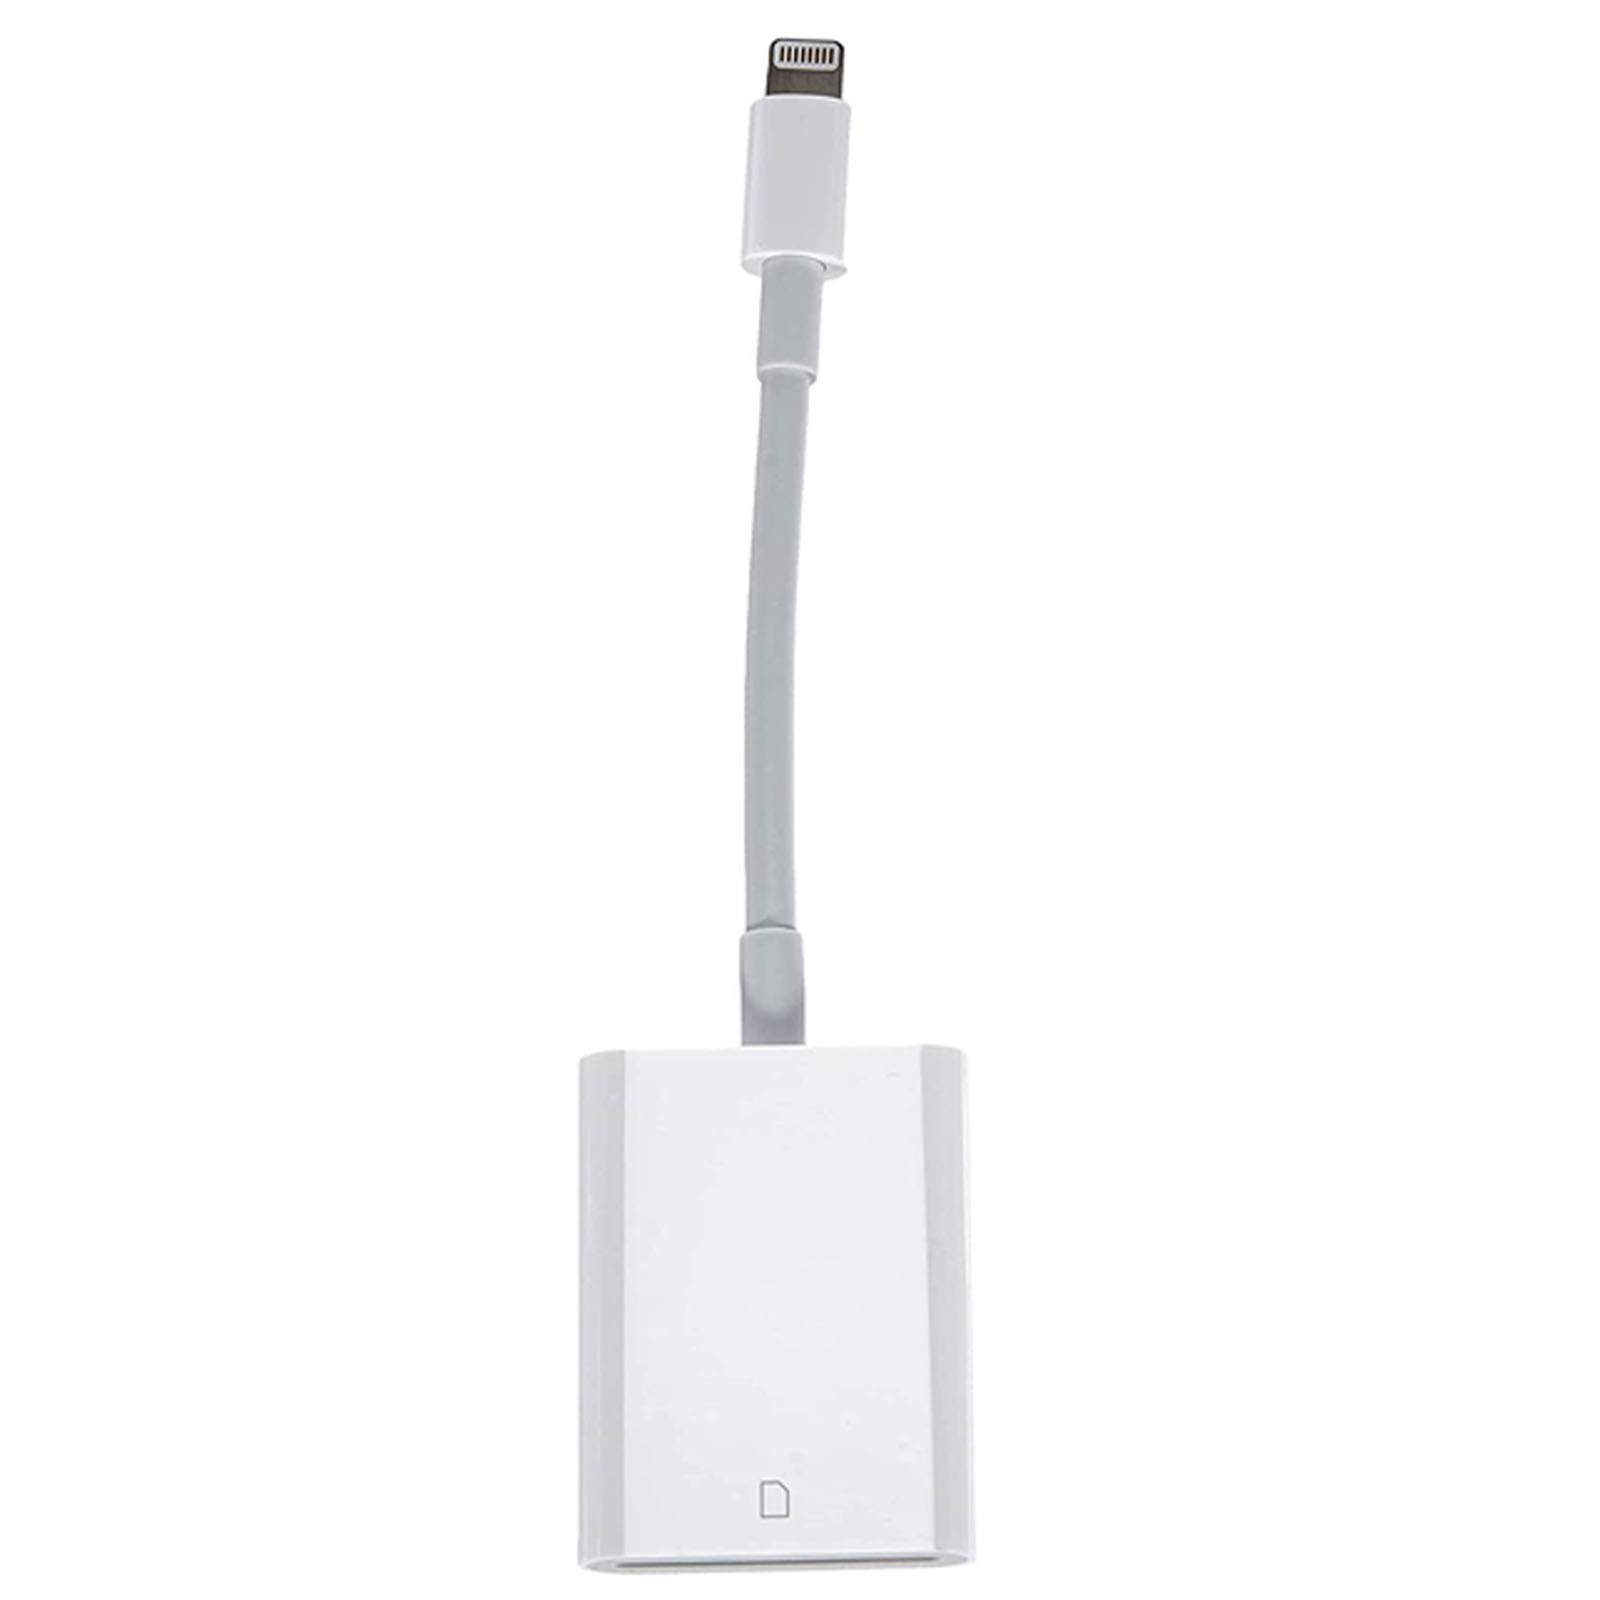 Image of Apple Adapter Lightning to SD Card